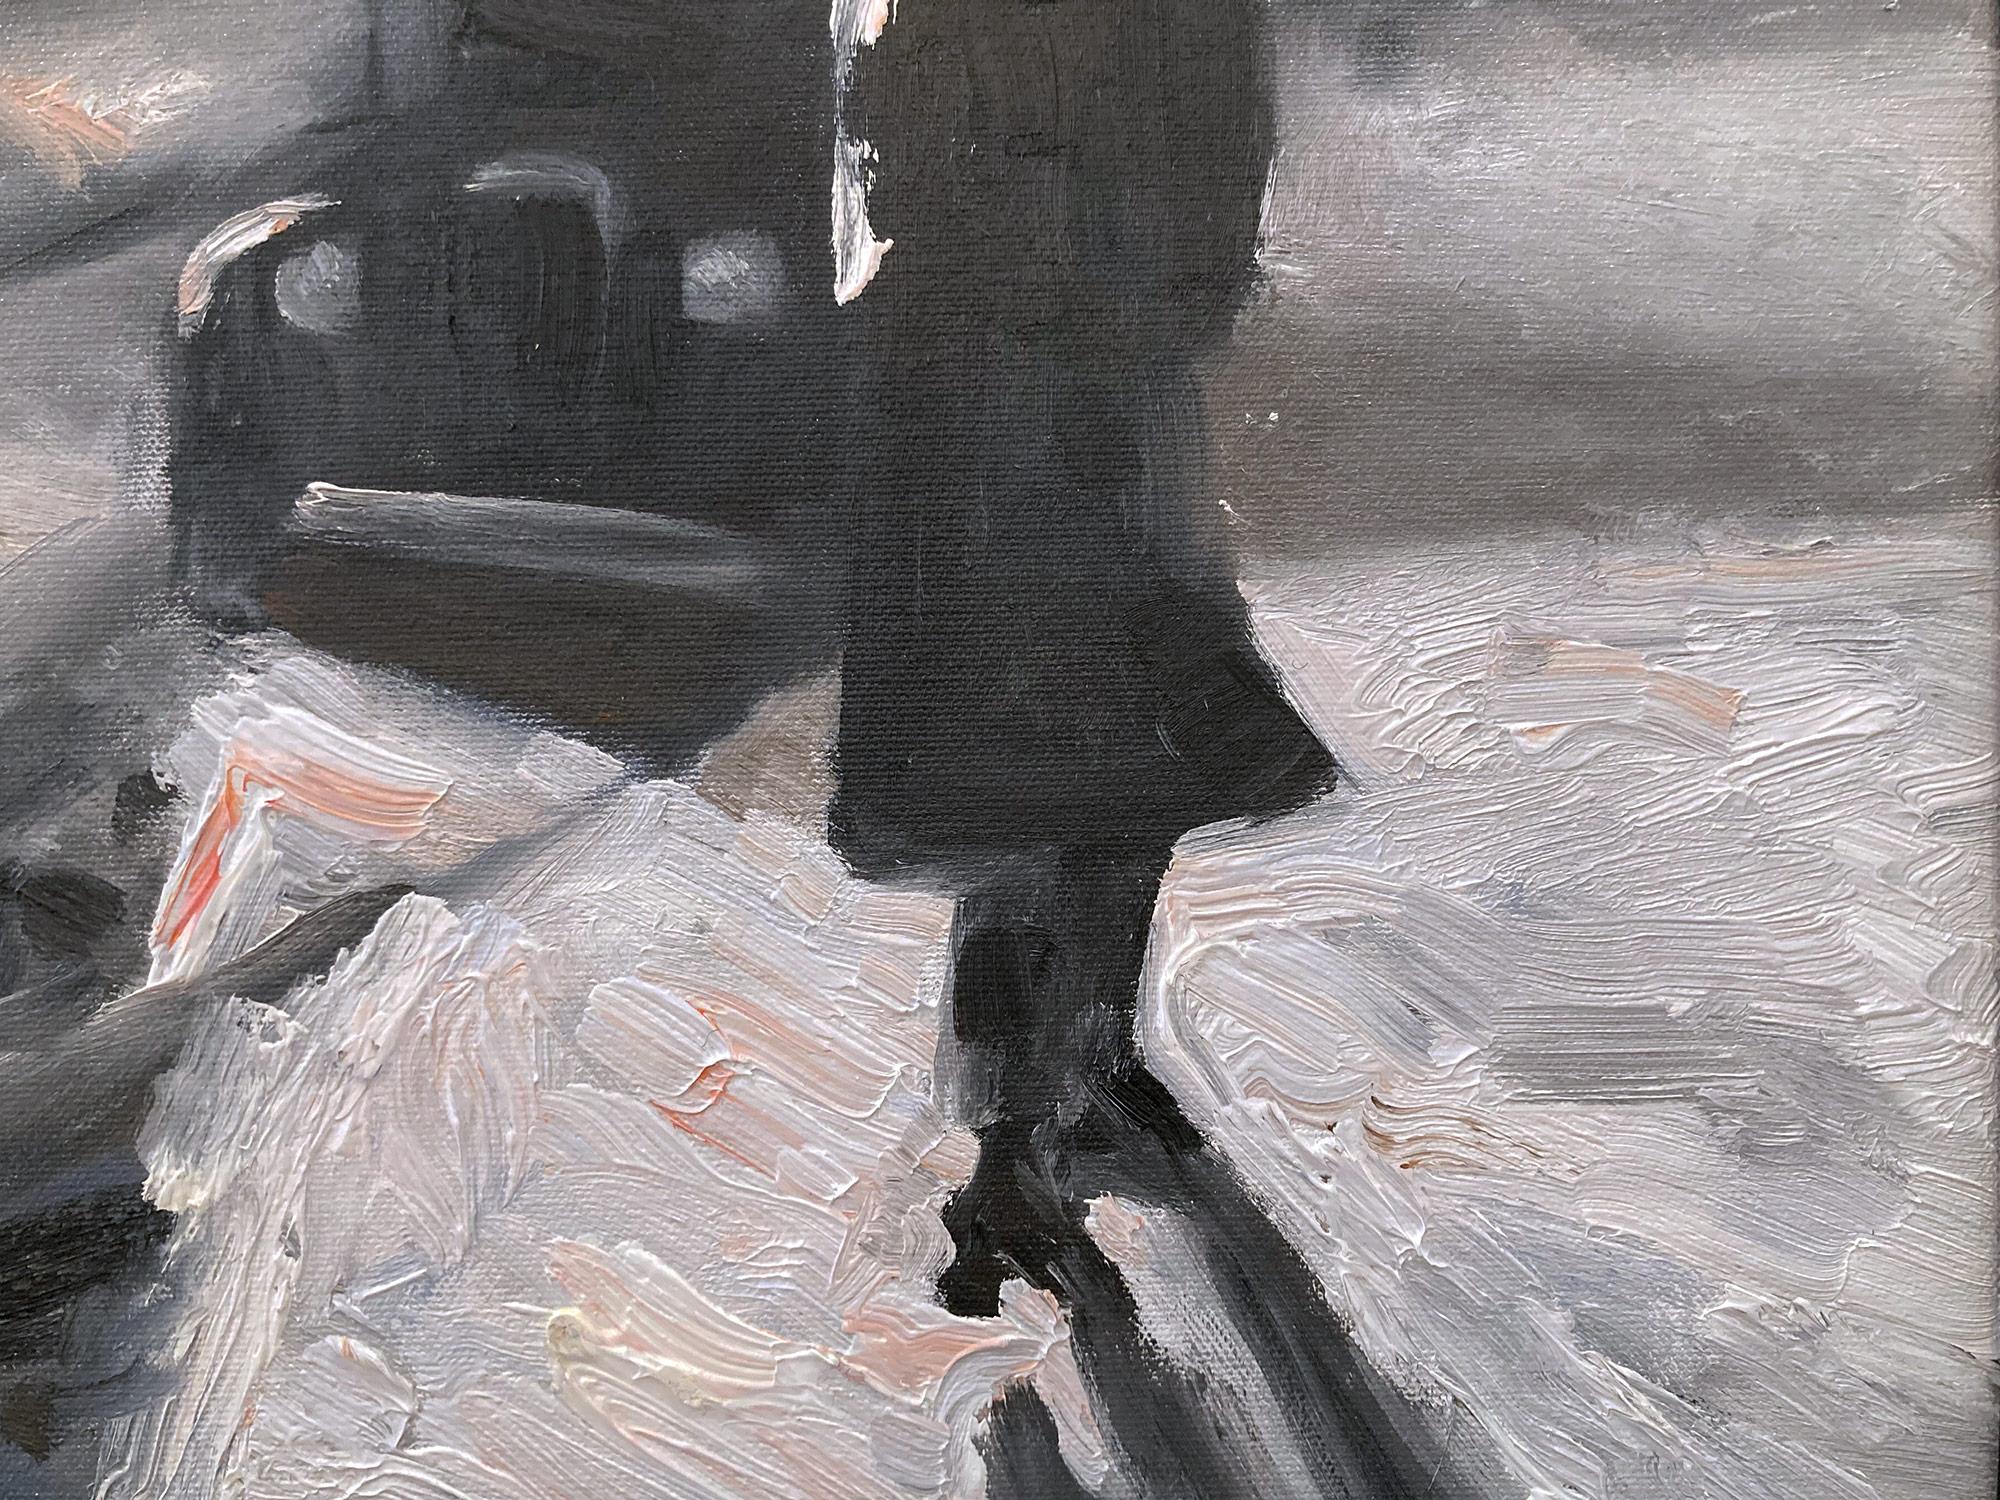 This painting depicts an impressionistic scene of New York City in the snow of a figure walking down a long sidewalk with wide casting shadows. Following the great artists from the Ashcan school of the 20th Century, this painting falls in line